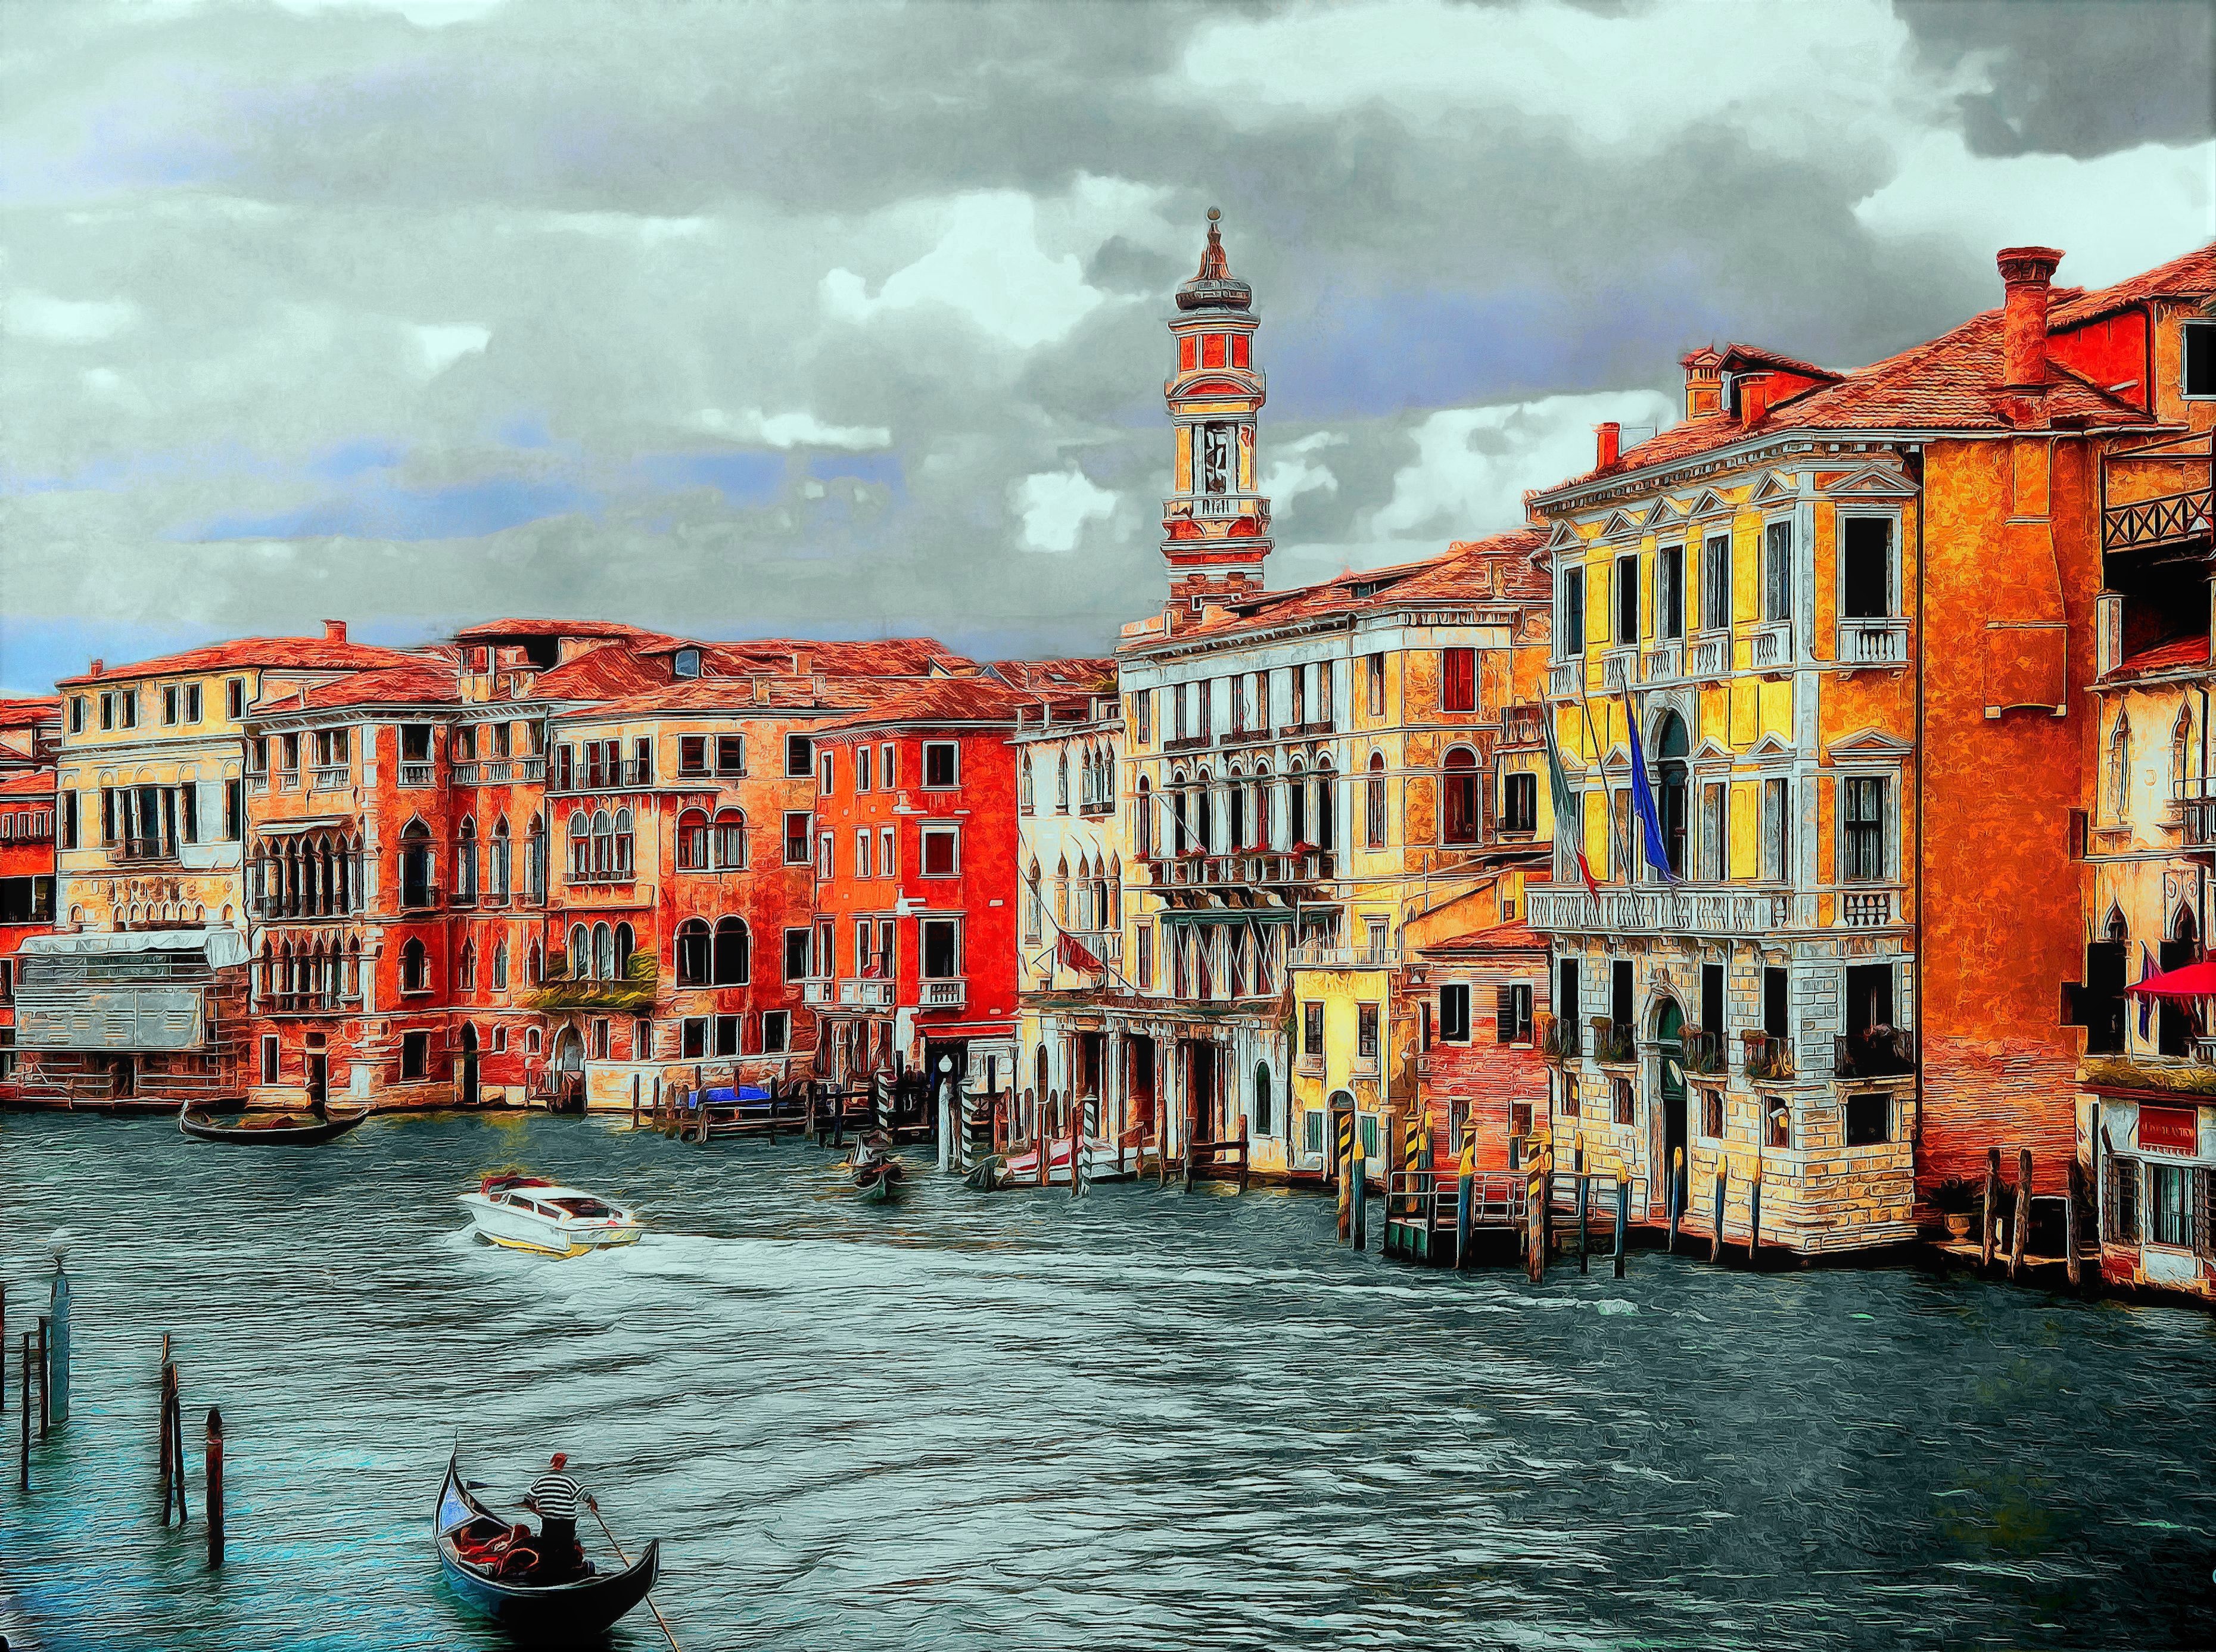 man made, venice, building, colorful, gondola, grand canal, italy, cities 8K